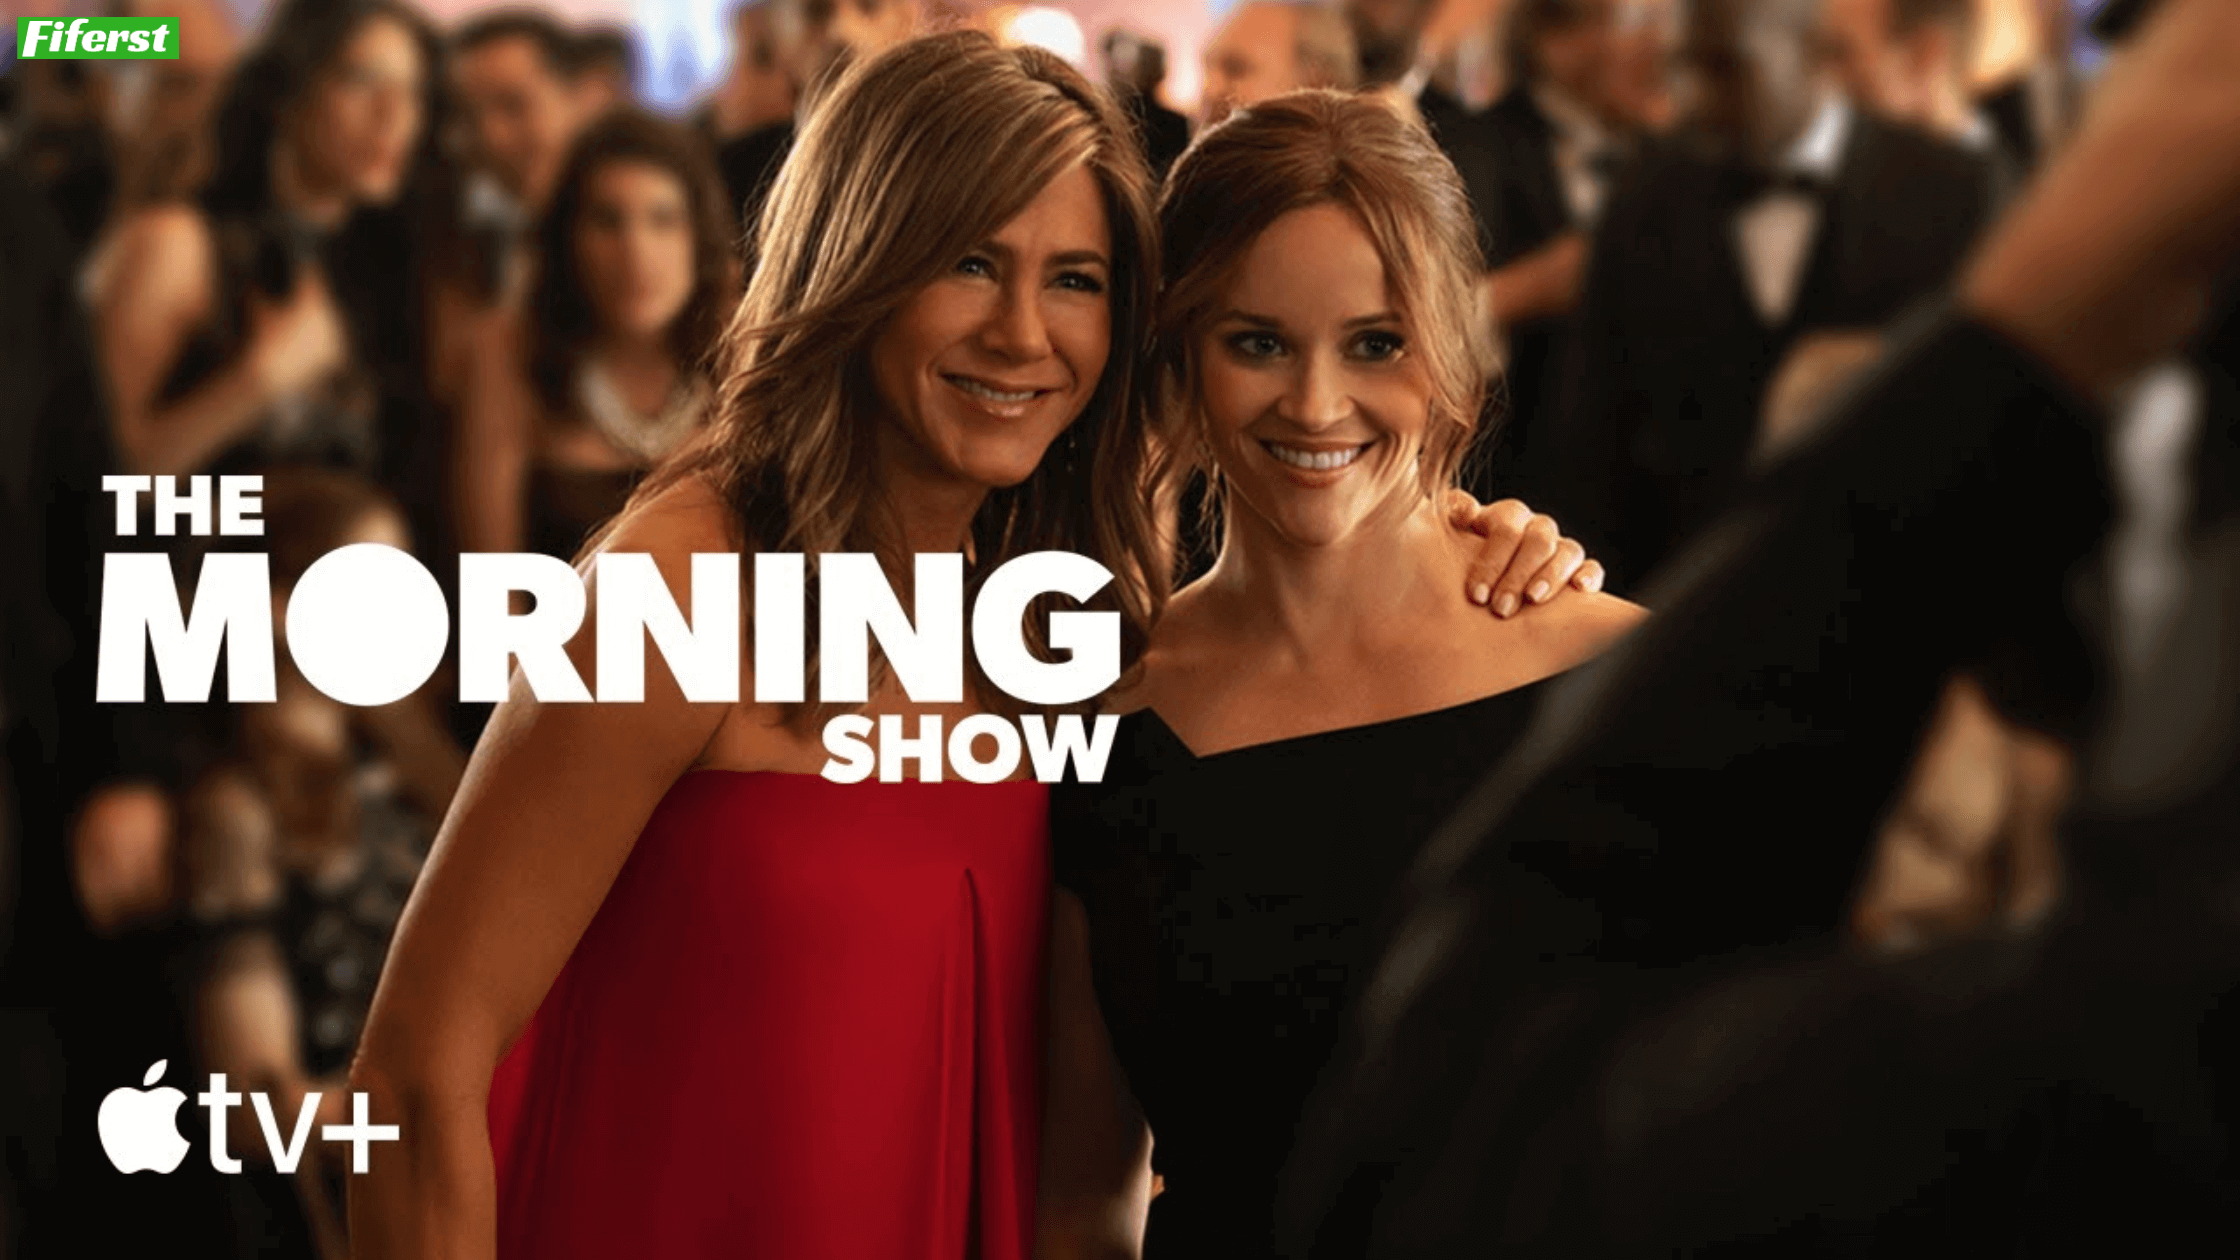 The morning show season 2 release date